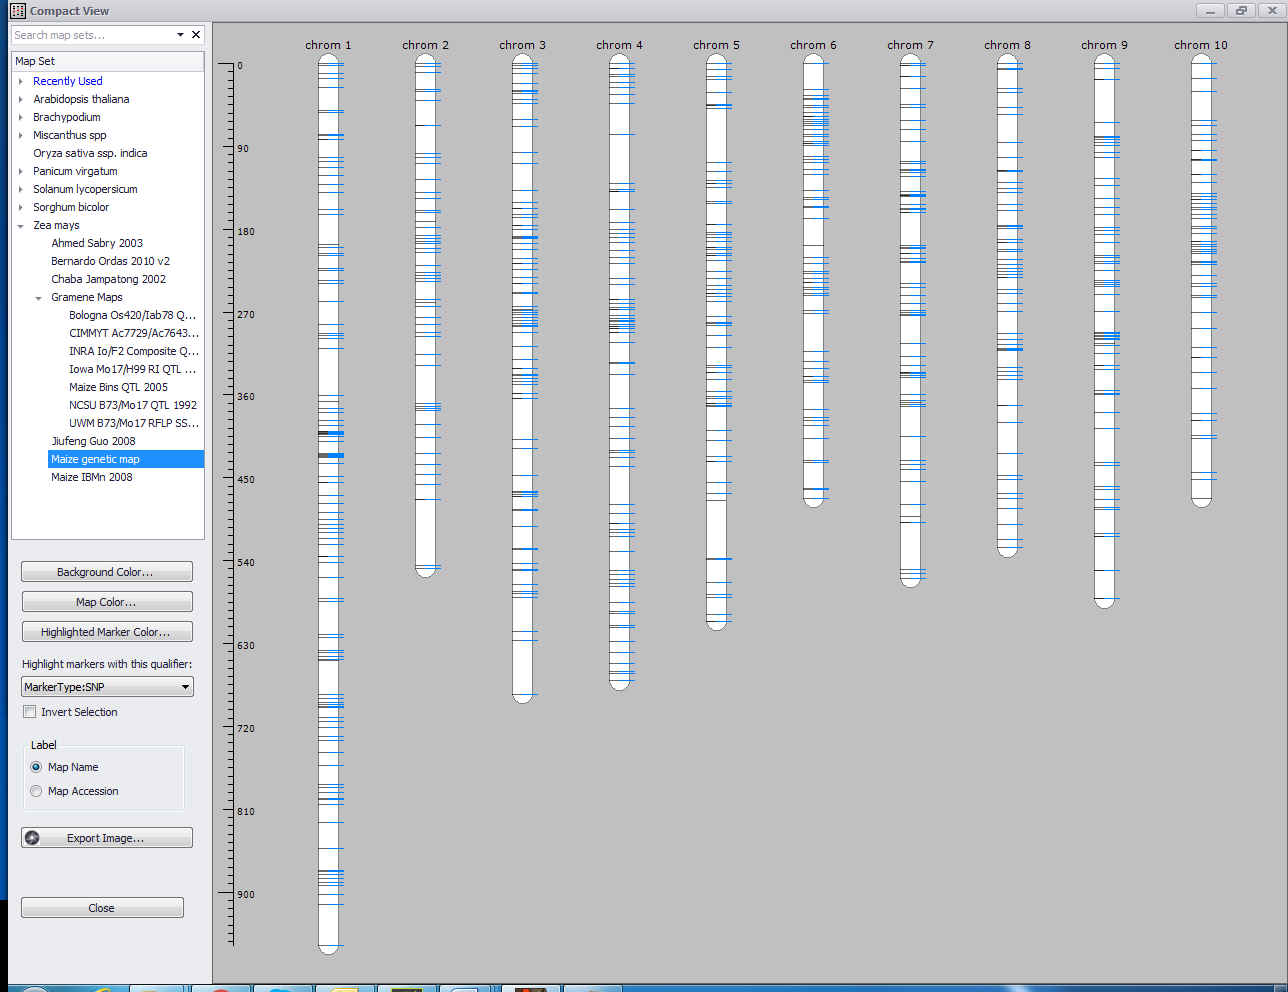 Compact view of genetic map (Arabidopsis genome, only 3 of 5 chromosomes shown)